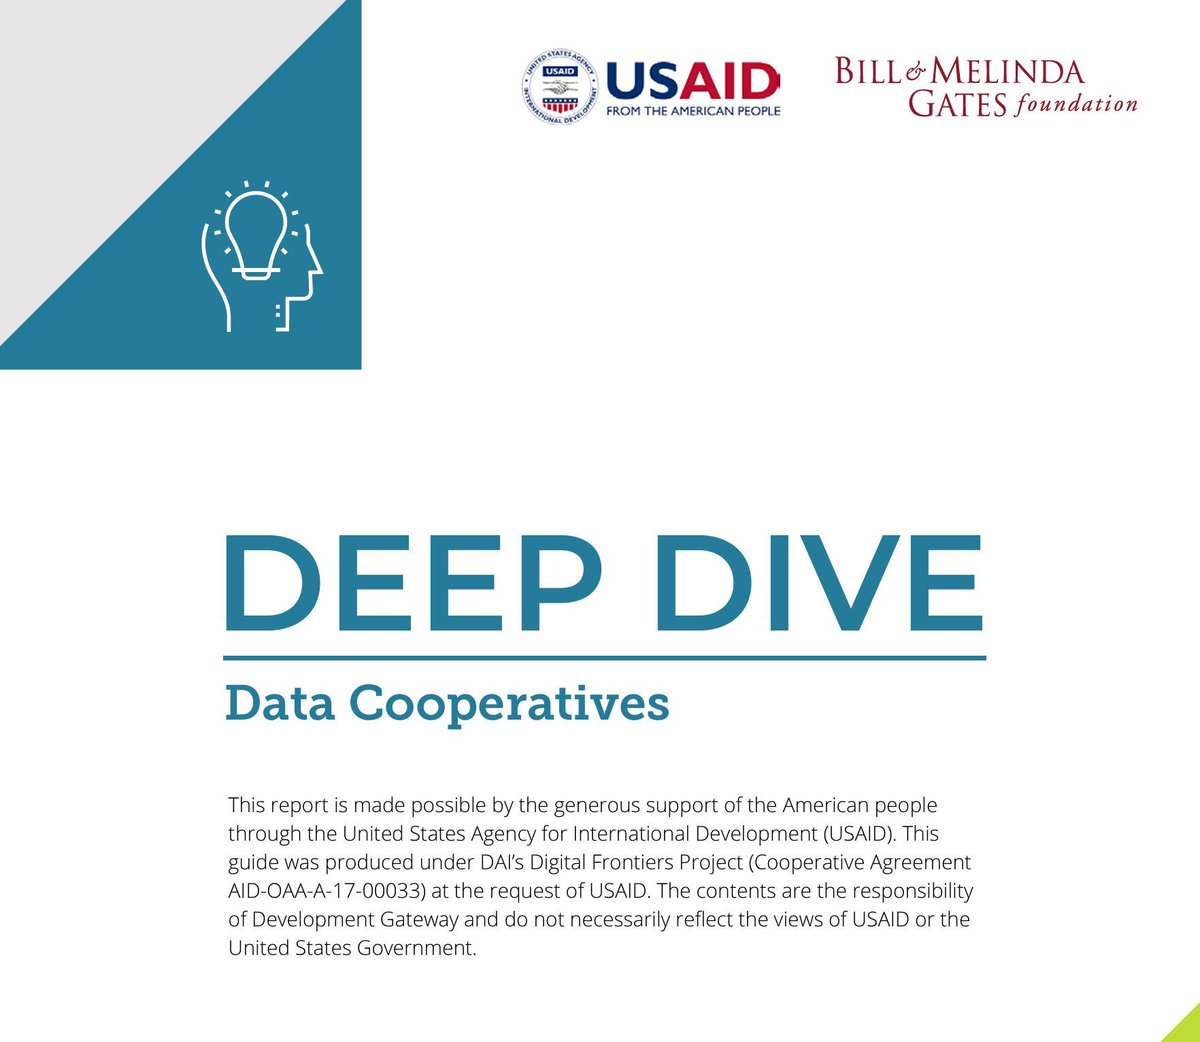 Did you know that #DataCooperatives—which are created when individuals voluntarily pooling their personal data for mutual economic, social, and cultural benefit—can empower these individuals? 

Learn how: buff.ly/414bAhB